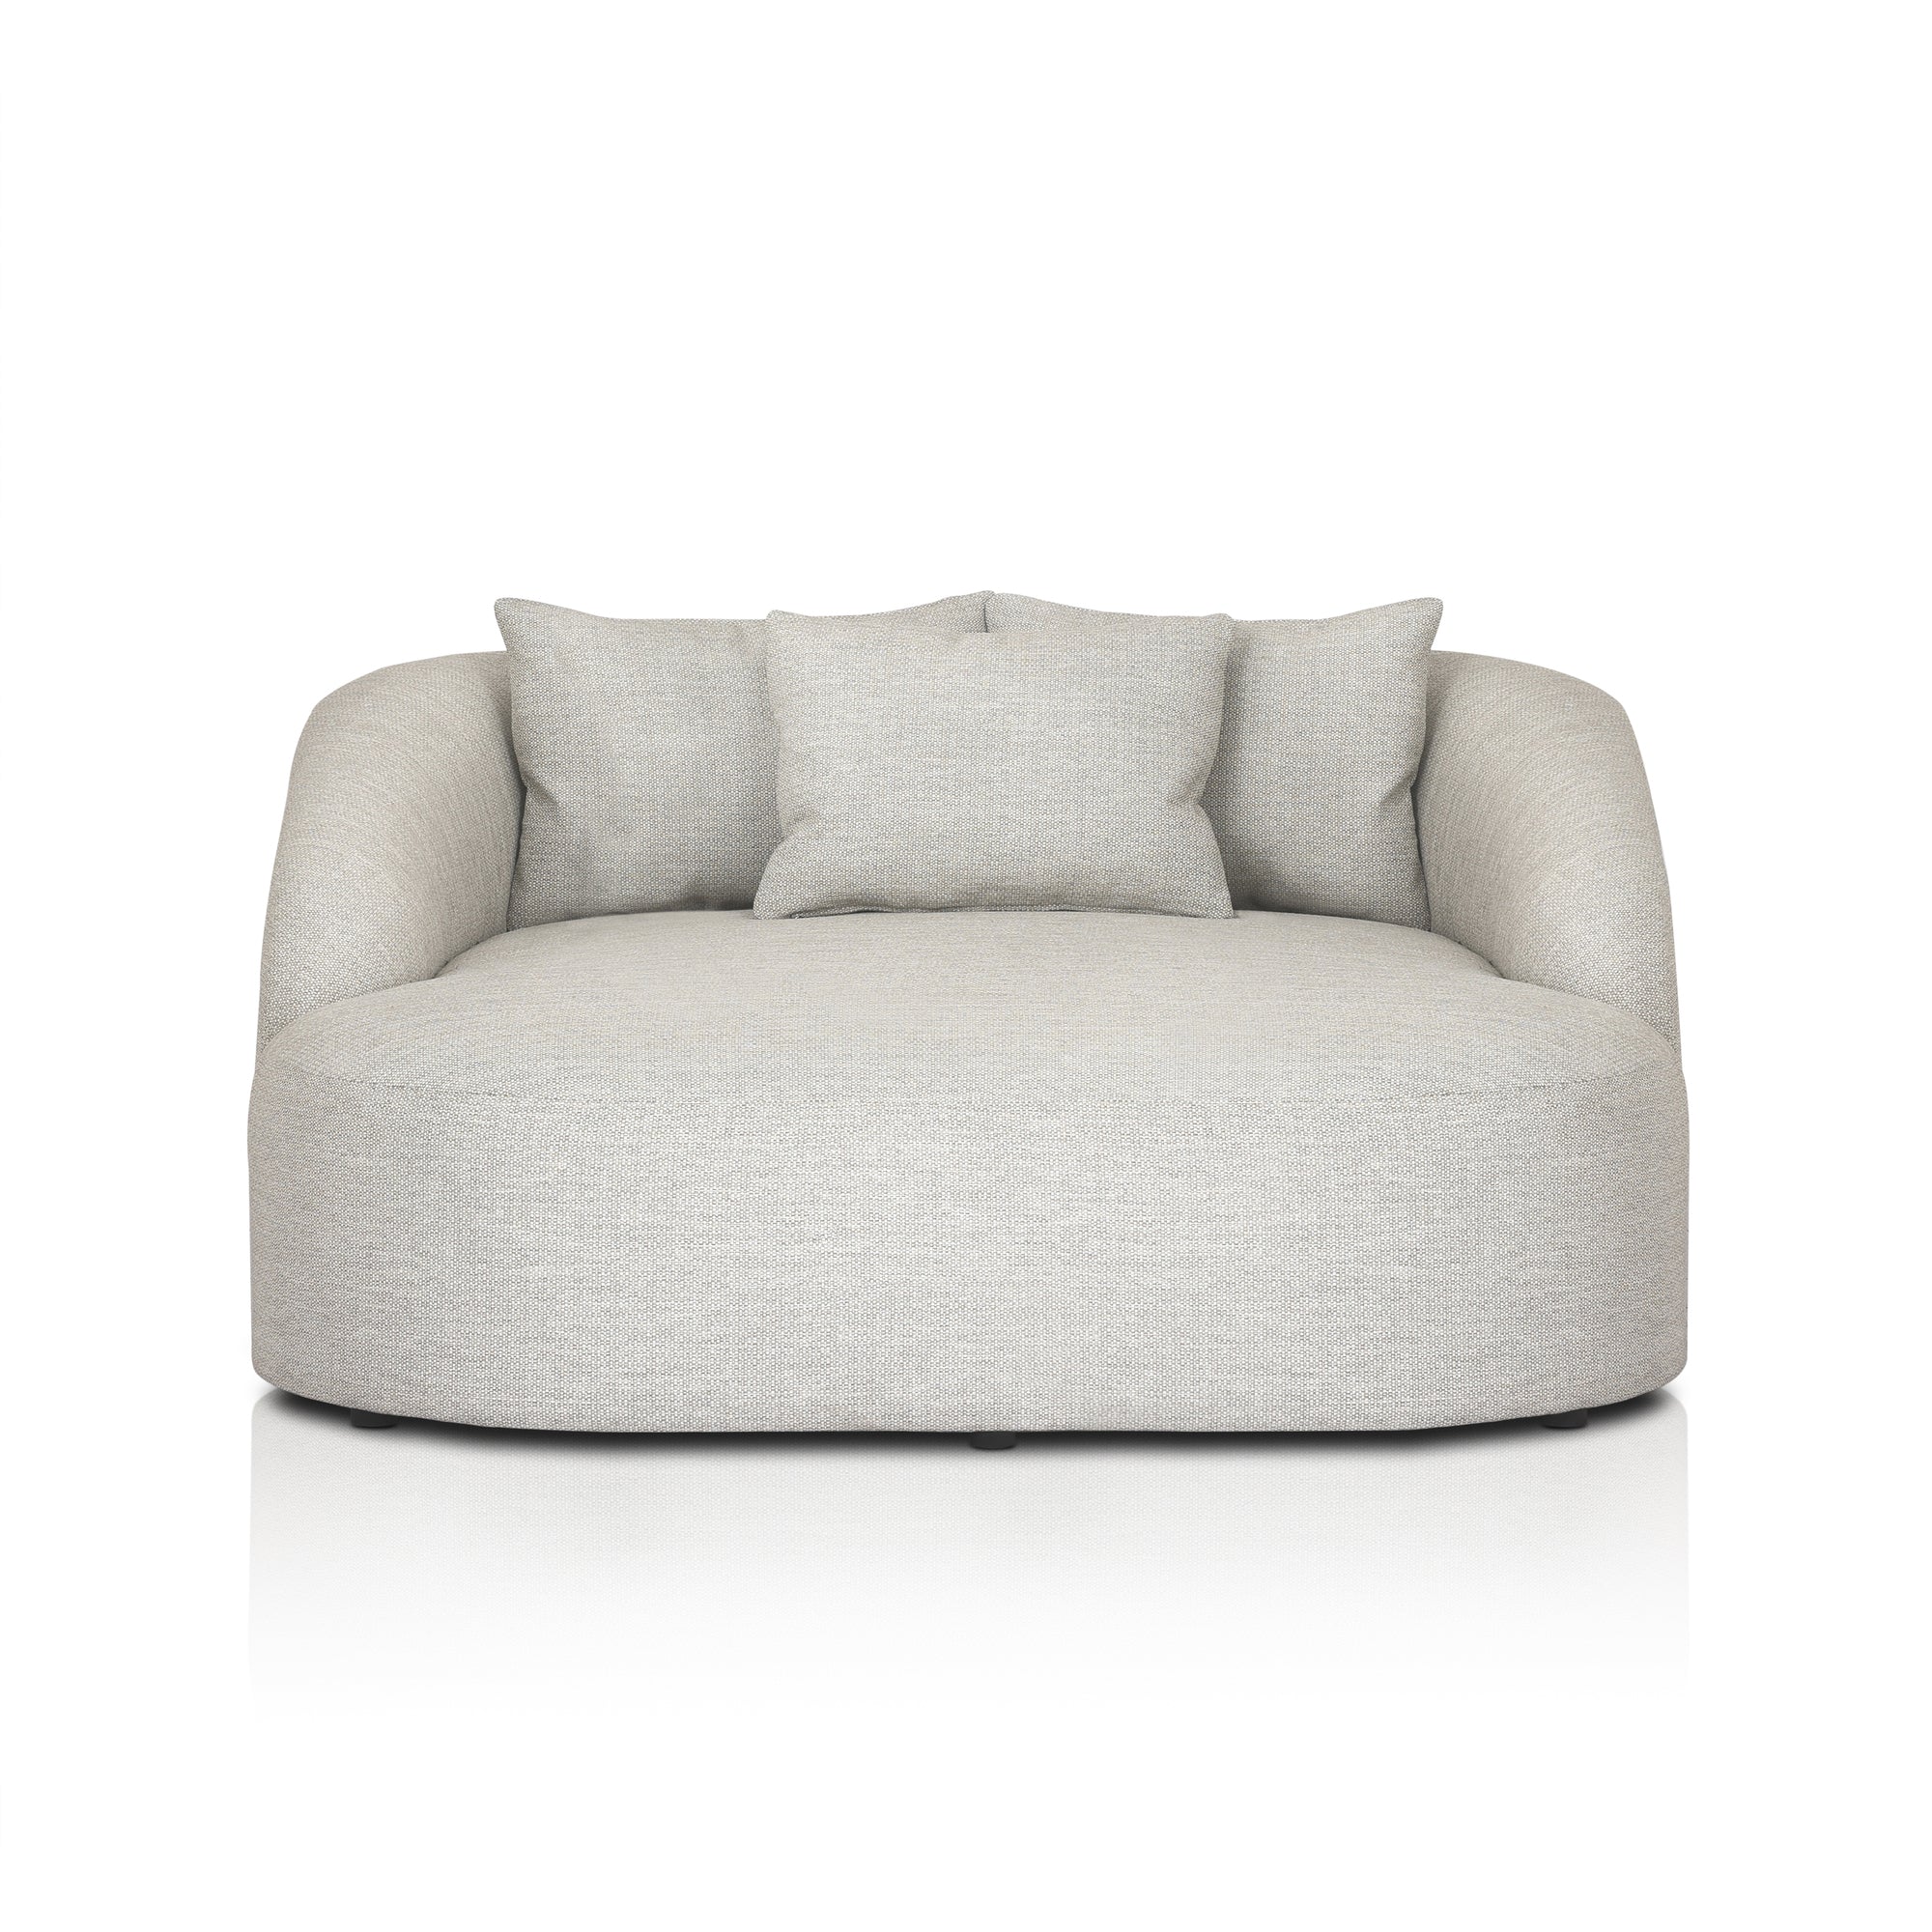 Ellis Outdoor Daybed